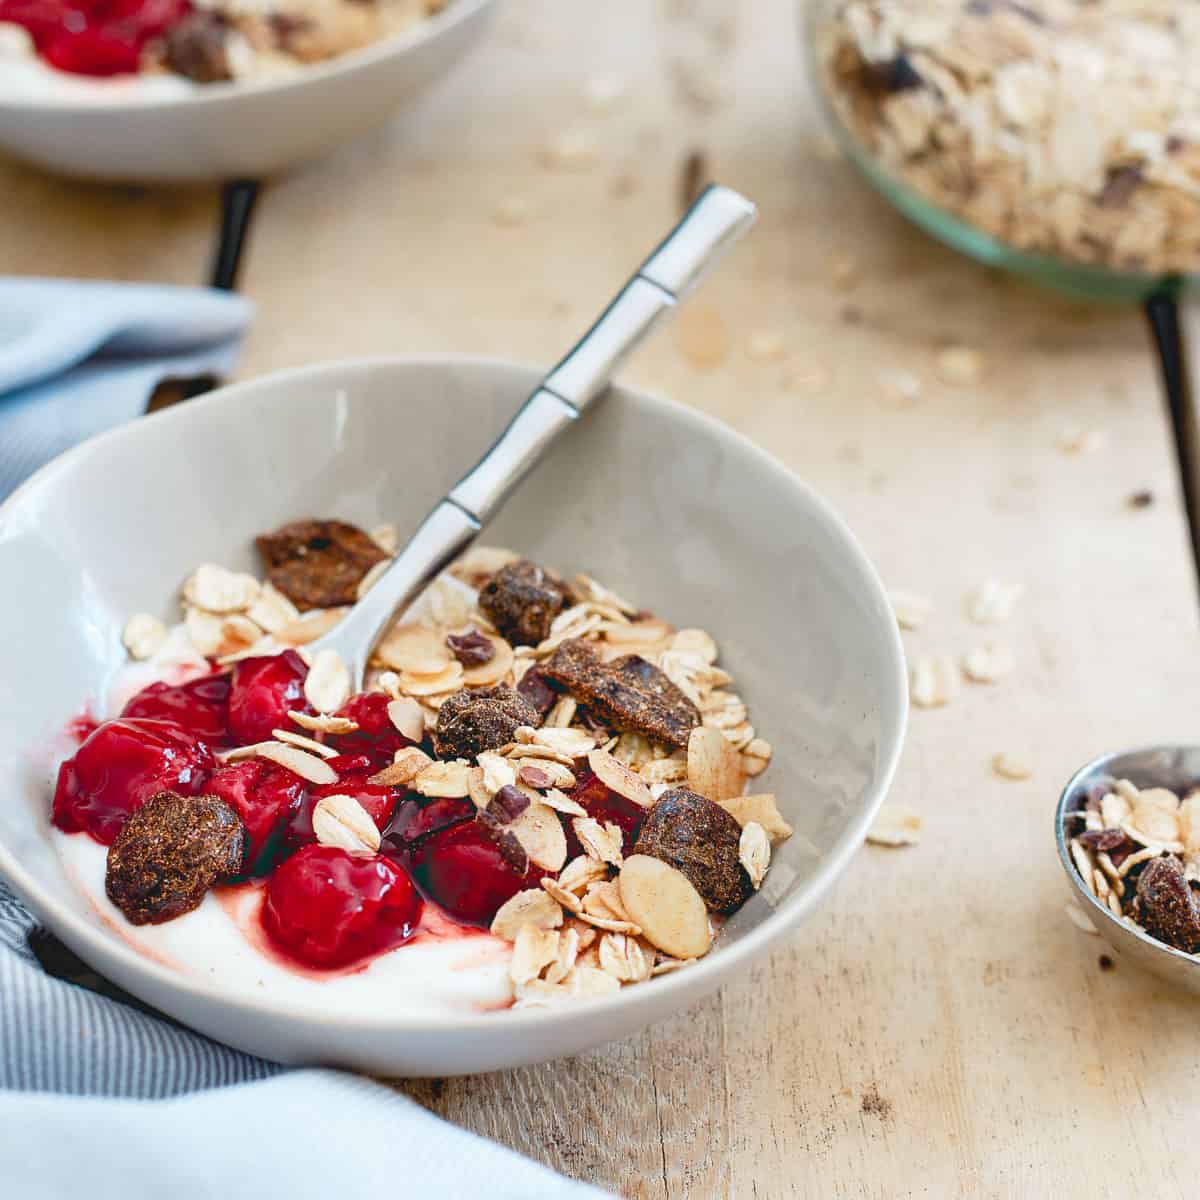 Fruity, hearty, nutritious and tasty, these tart cherry yogurt bowls are the perfect start to your day for a sweet take on breakfast.